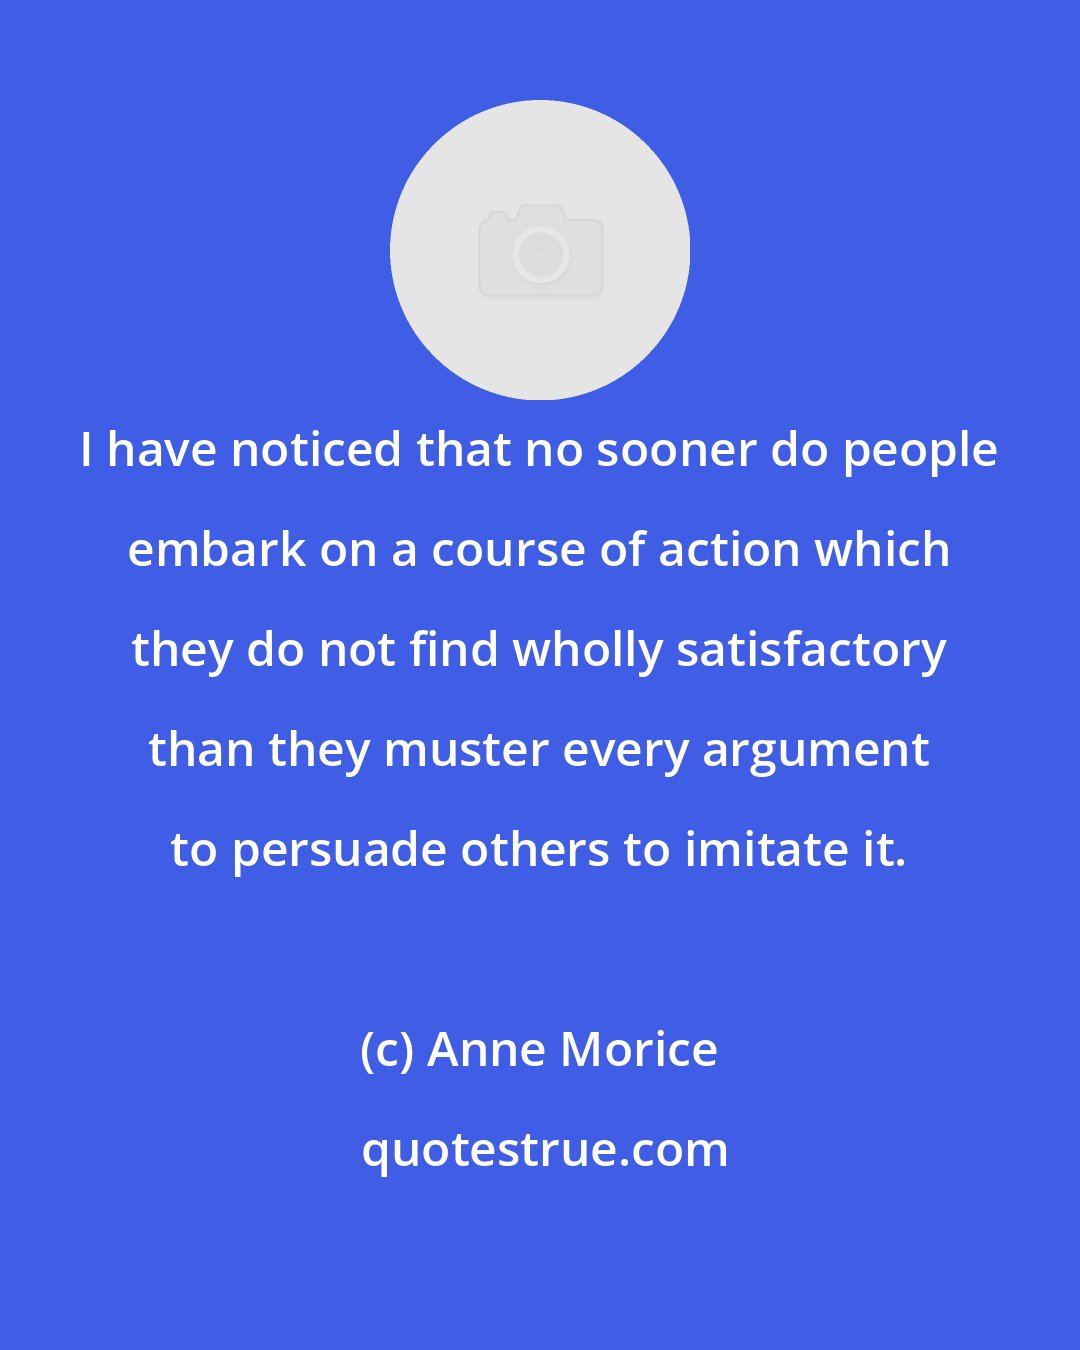 Anne Morice: I have noticed that no sooner do people embark on a course of action which they do not find wholly satisfactory than they muster every argument to persuade others to imitate it.